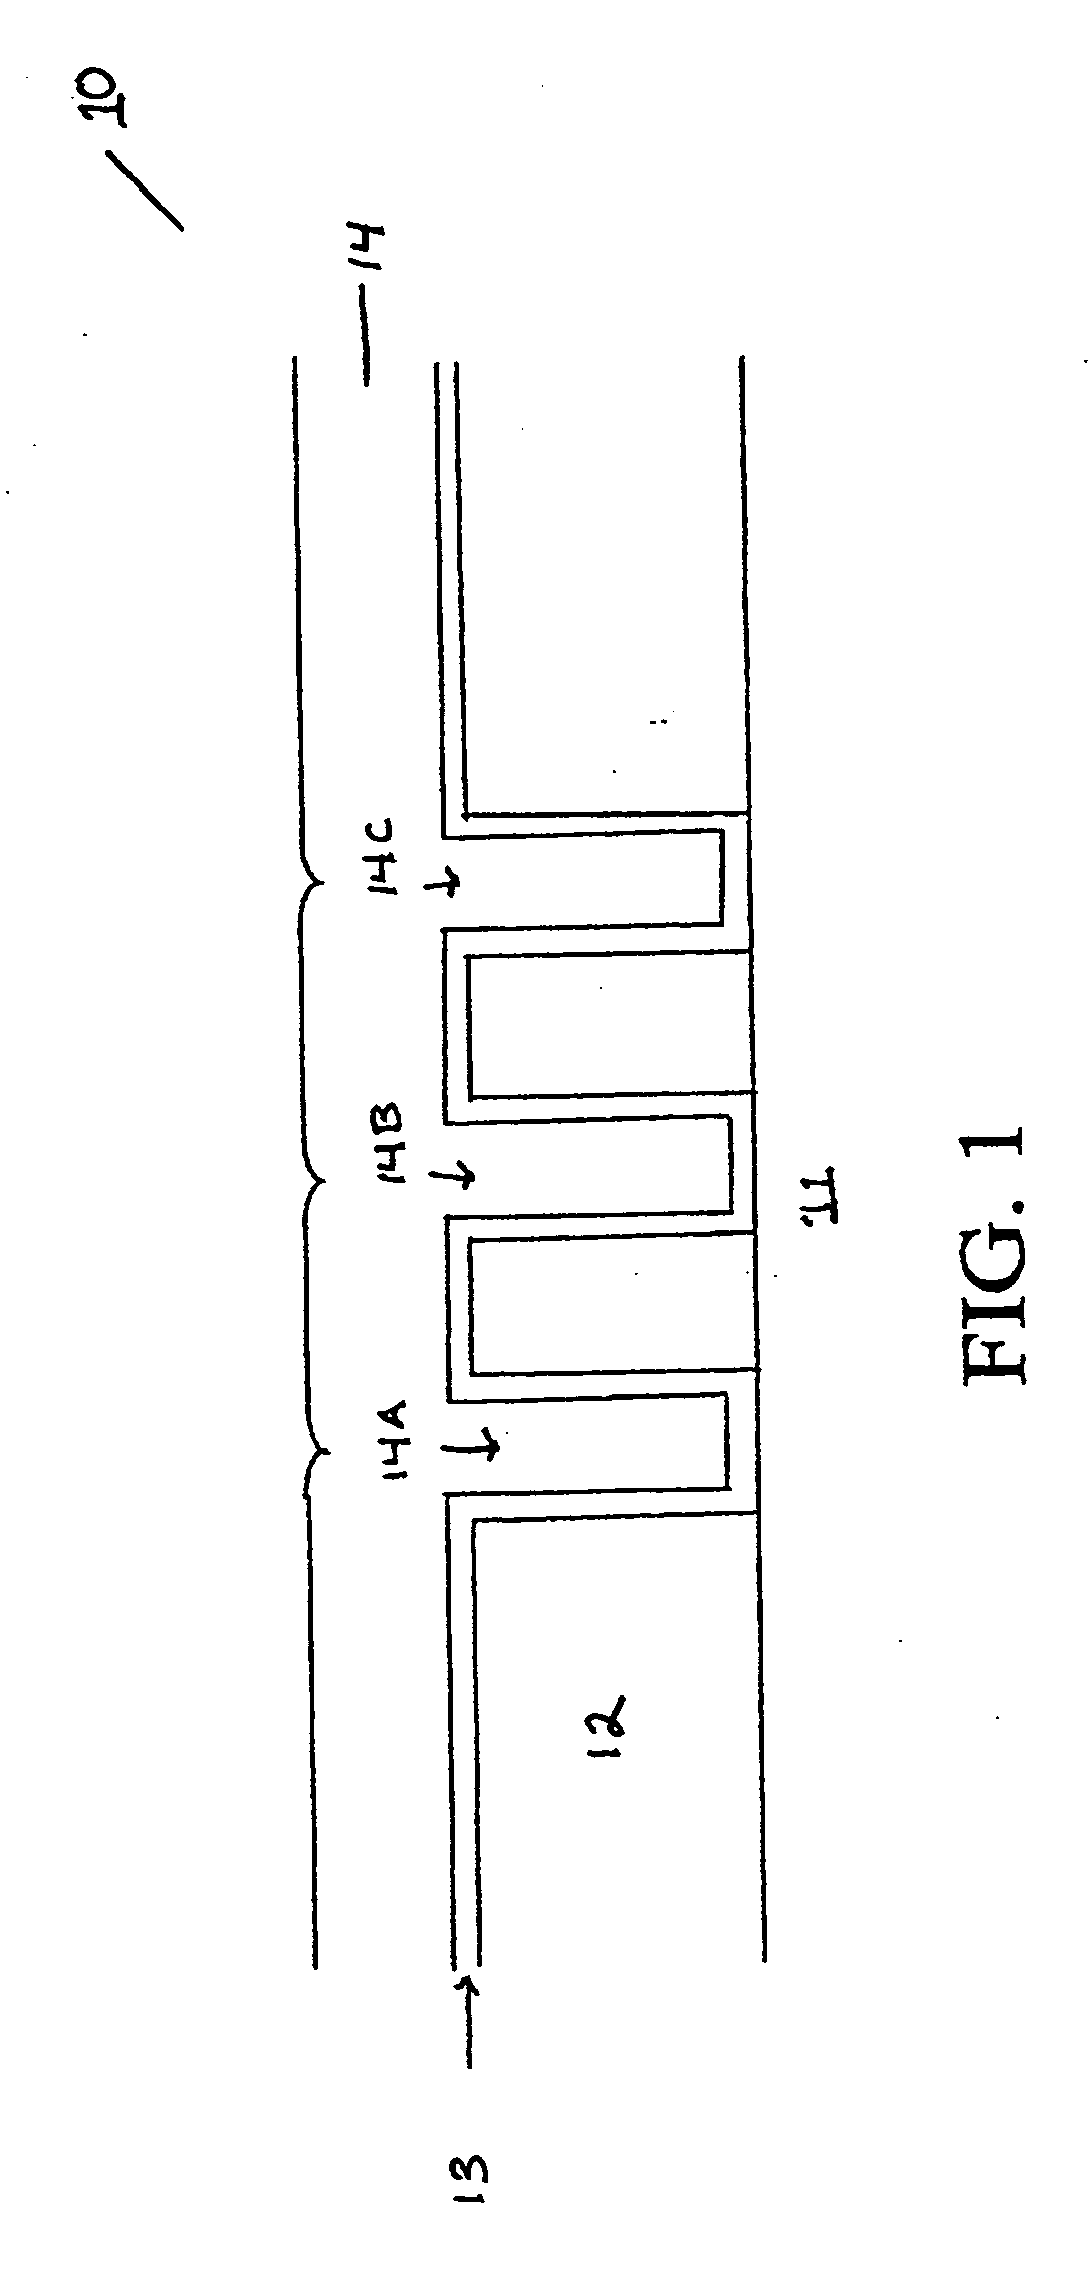 Chemical mechanical polishing compositions for metal and associated materials and method of using same